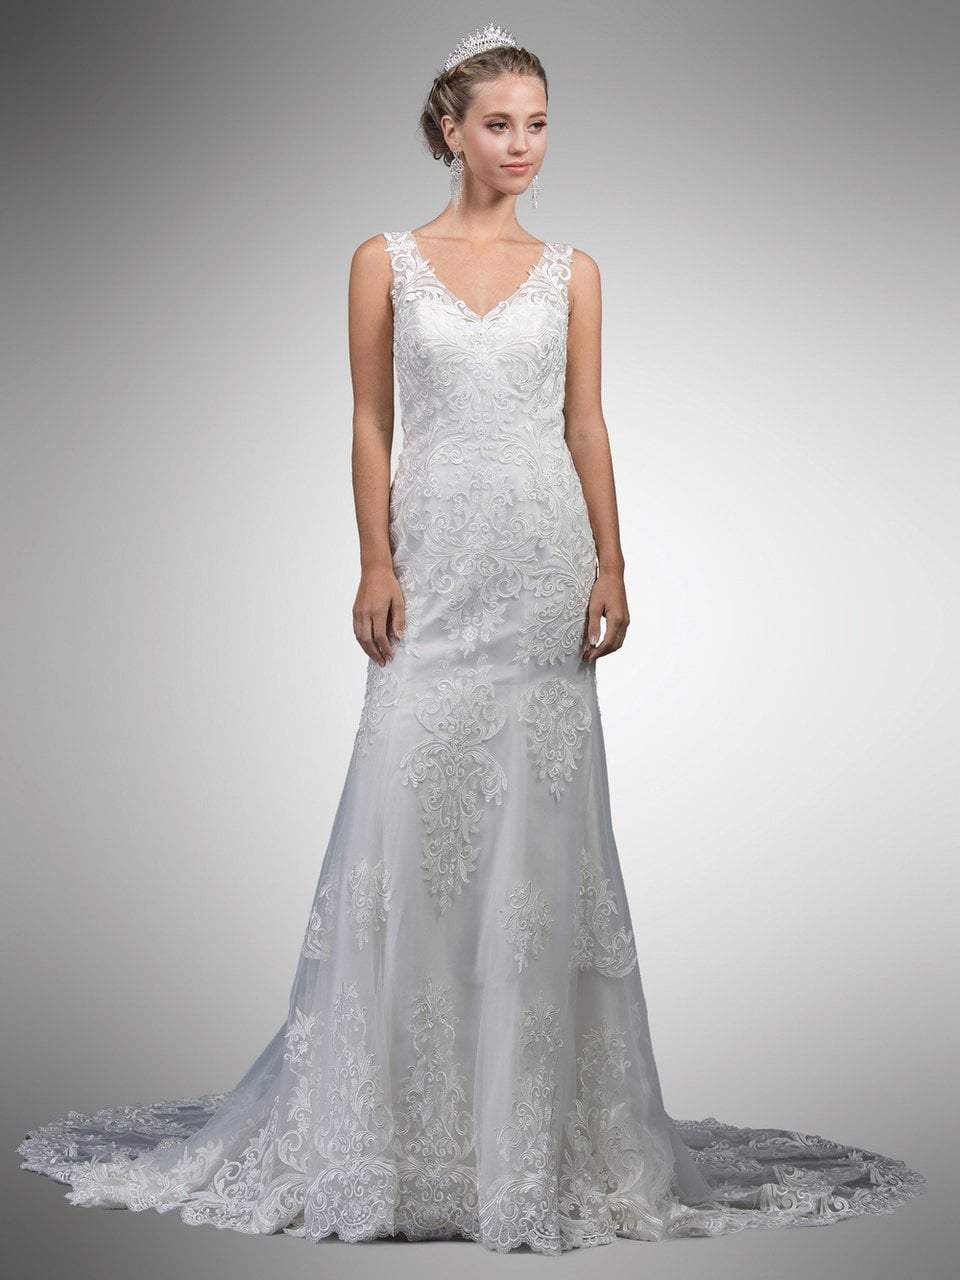 Dancing Queen Bridal - 45 Lace Embroidered V-neck Gown With Train ...